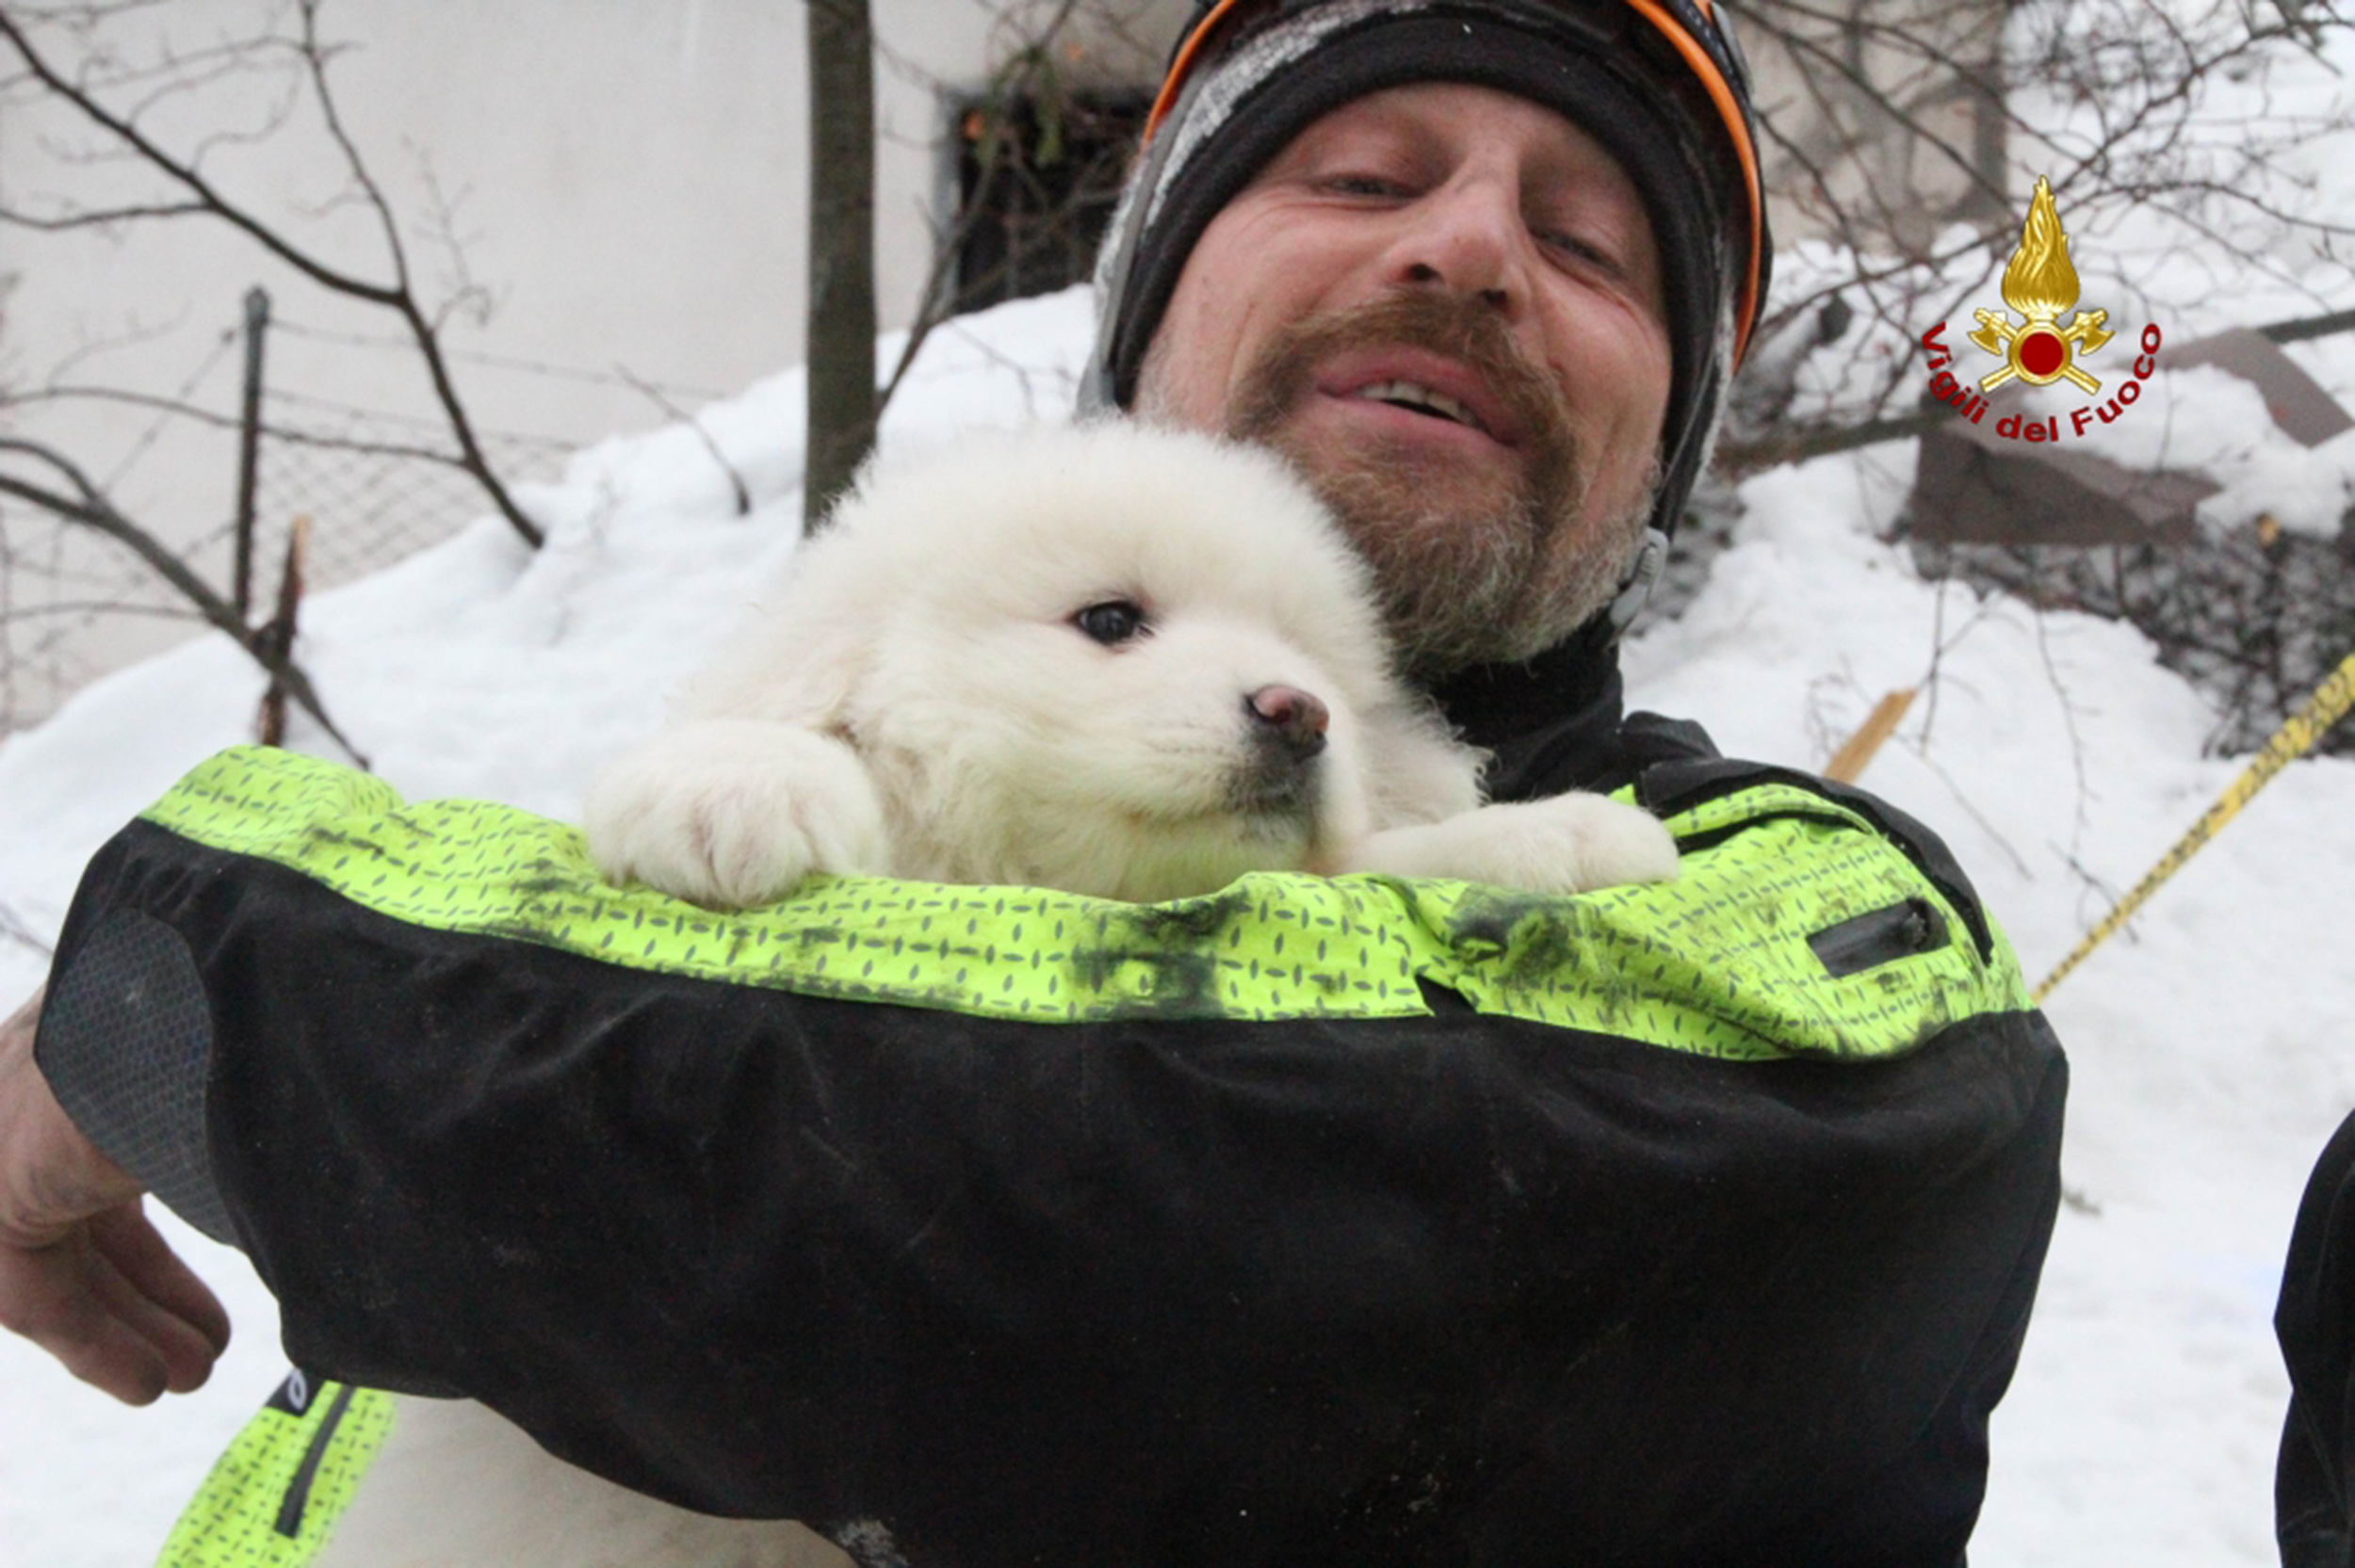 A handout picture released on January 23, 2017 by the Italian Firemen "Vigili del Fuoco" shows a fireman carrying a puppy found at the avalanche-hit Hotel Rigopiano, near the village of Farindola, on the eastern lower slopes of the Gran Sasso mountain. Fireman Fabio Jerman said three puppies had been found alive today in one of the air pockets under the rubble, which he said was "an important sign of life which gives us hope". Italian rescuers pulled nine survivors from the hotel hit by an avalanche on January 18, 2016 and continue to search the 23 people still trapped under the ruins. A sixth victim was pulled out of the rubble and snow yesterday. / AFP PHOTO / AFP PHOTO AND Vigili del Fuoco / Fabio GATTO / RESTRICTED TO EDITORIAL USE - MANDATORY CREDIT "AFP PHOTO / VIGILI DEL FUOCO " - NO MARKETING NO ADVERTISING CAMPAIGNS - DISTRIBUTED AS A SERVICE TO CLIENTS